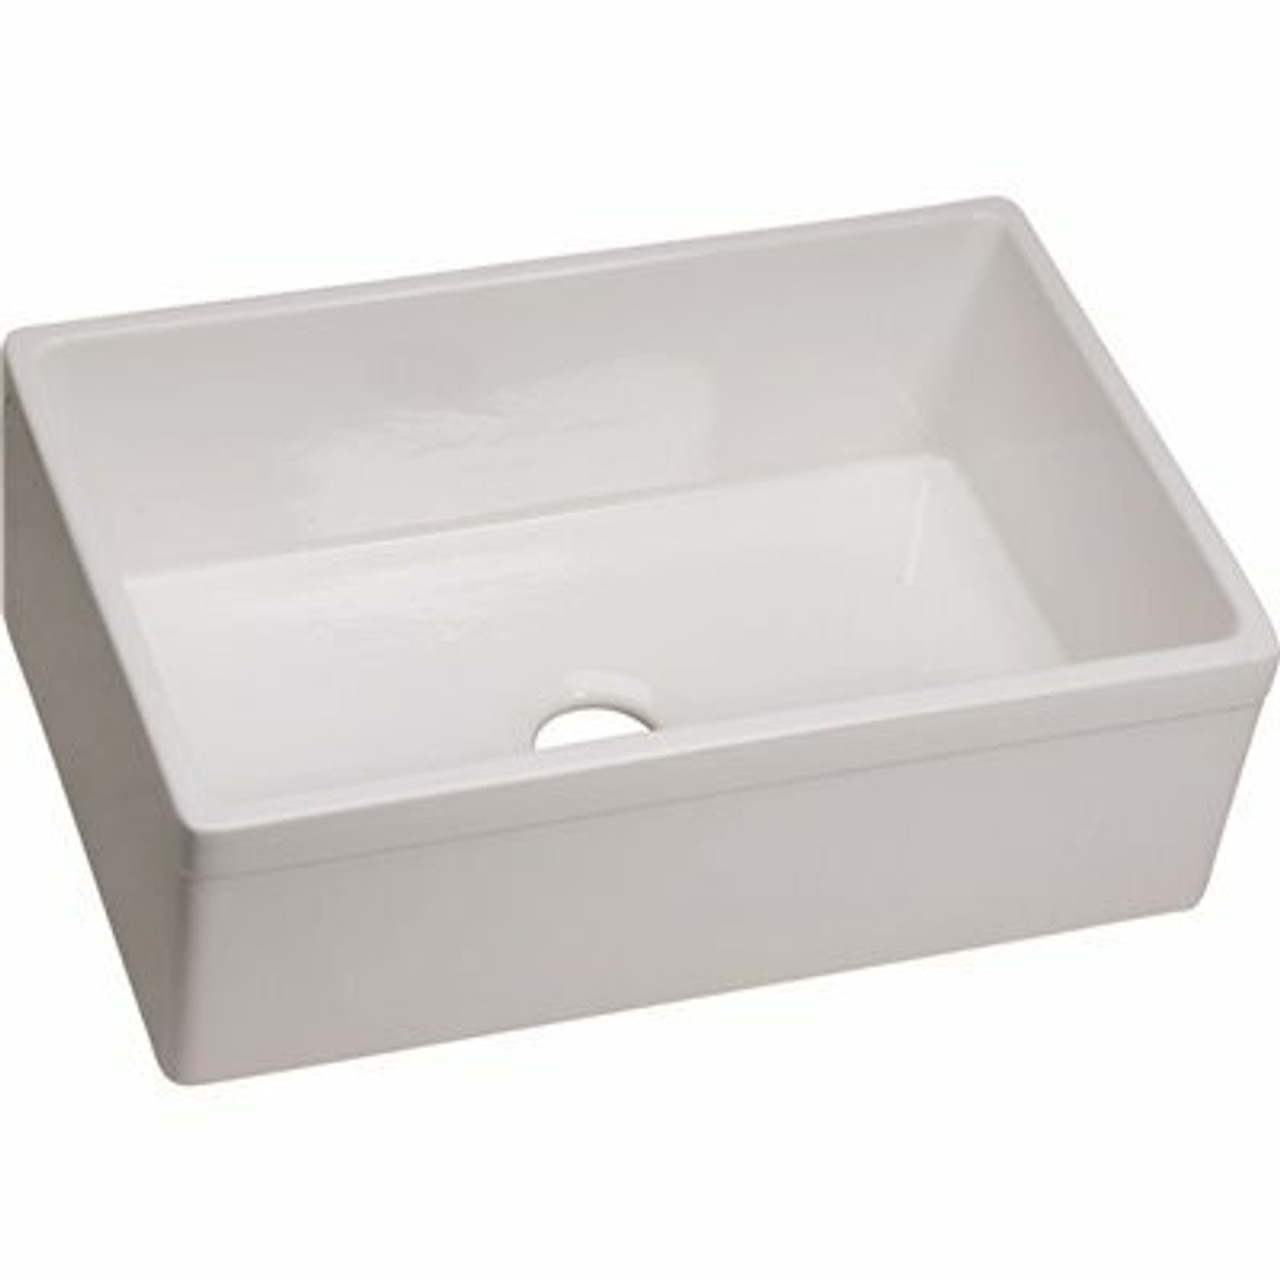 Elkay Explore Farmhouse Apron Front Fireclay 30 In. Single Bowl Kitchen Sink In Gloss White